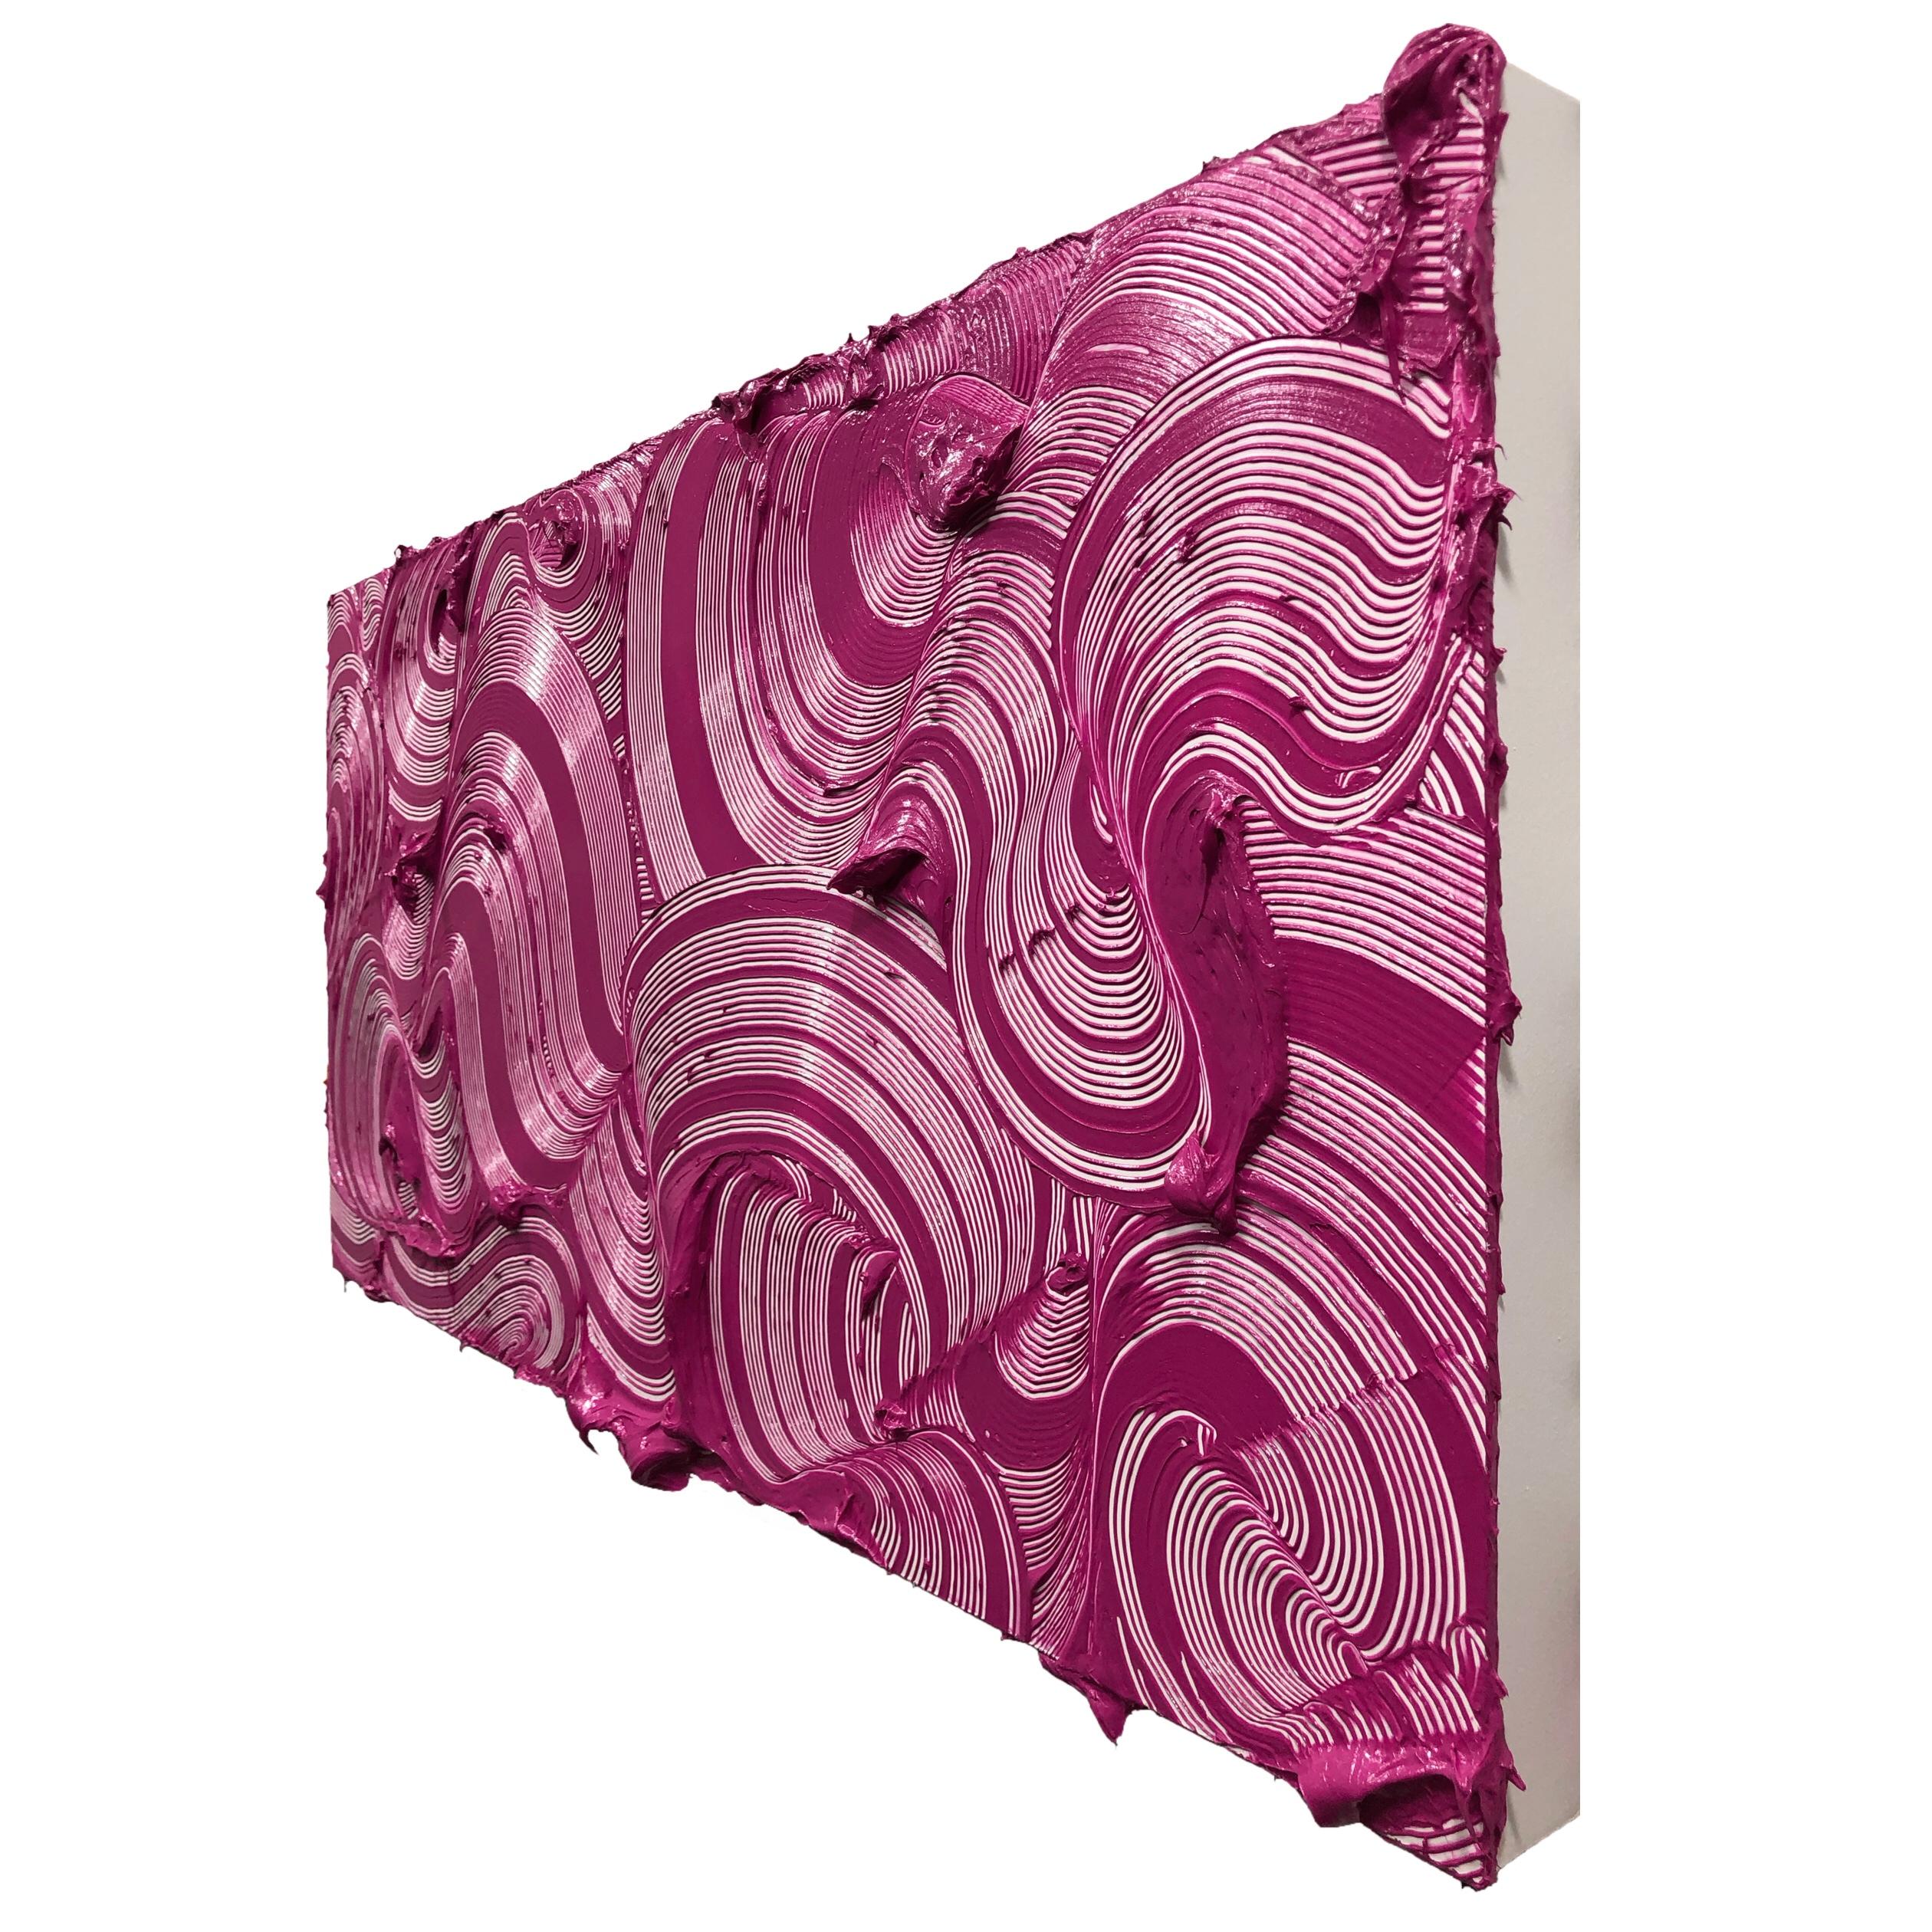 Guzzolene I - textured contemporary painting, magenta strokes, abstract - Painting by Tim Nikiforuk